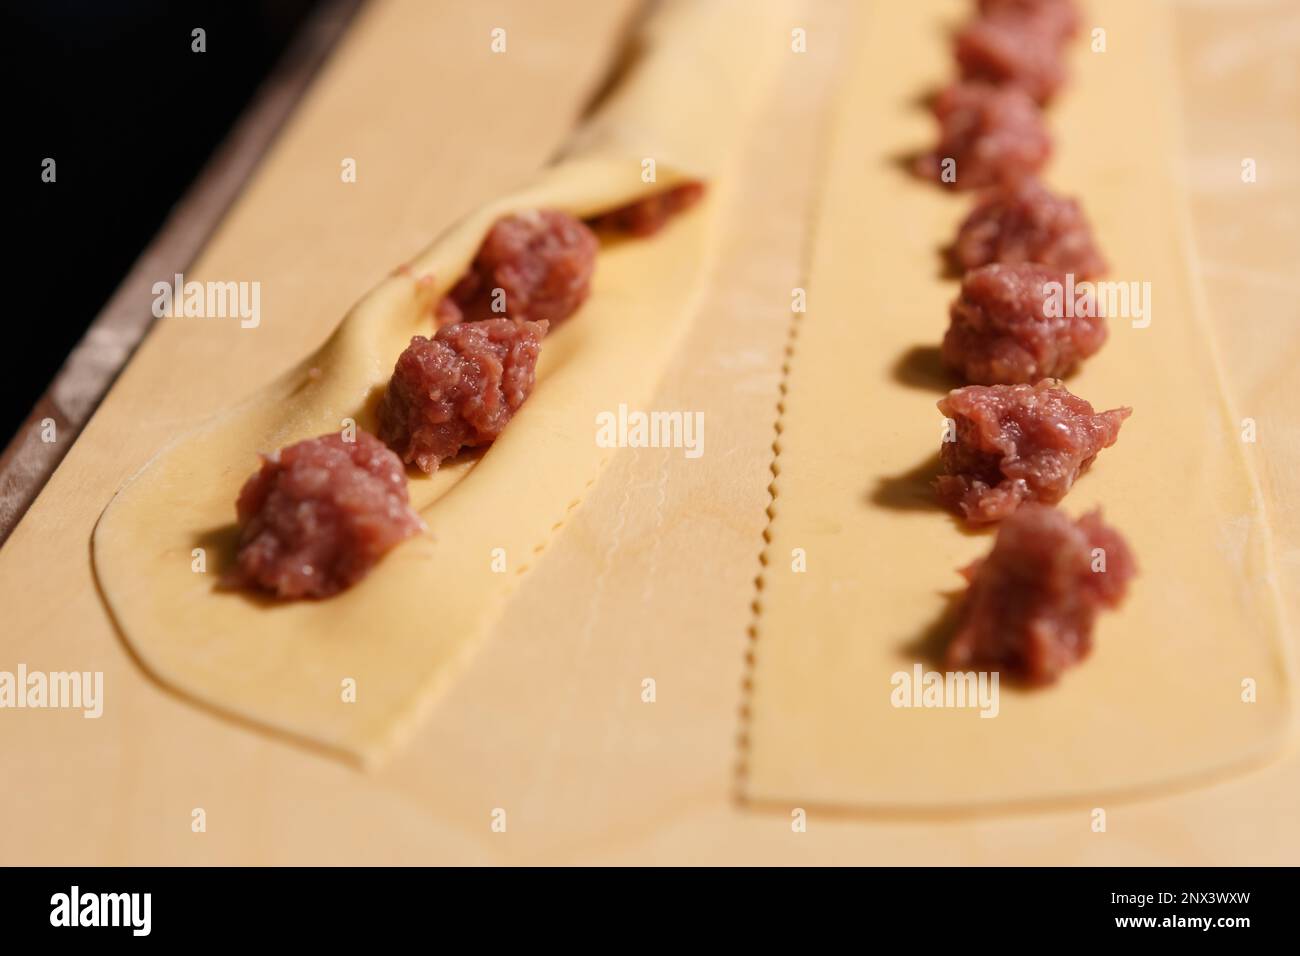 Process of cooking ravioli with red minced beef in Italian kitchen. Close up photo of dumpligns being cooked for dinner Stock Photo